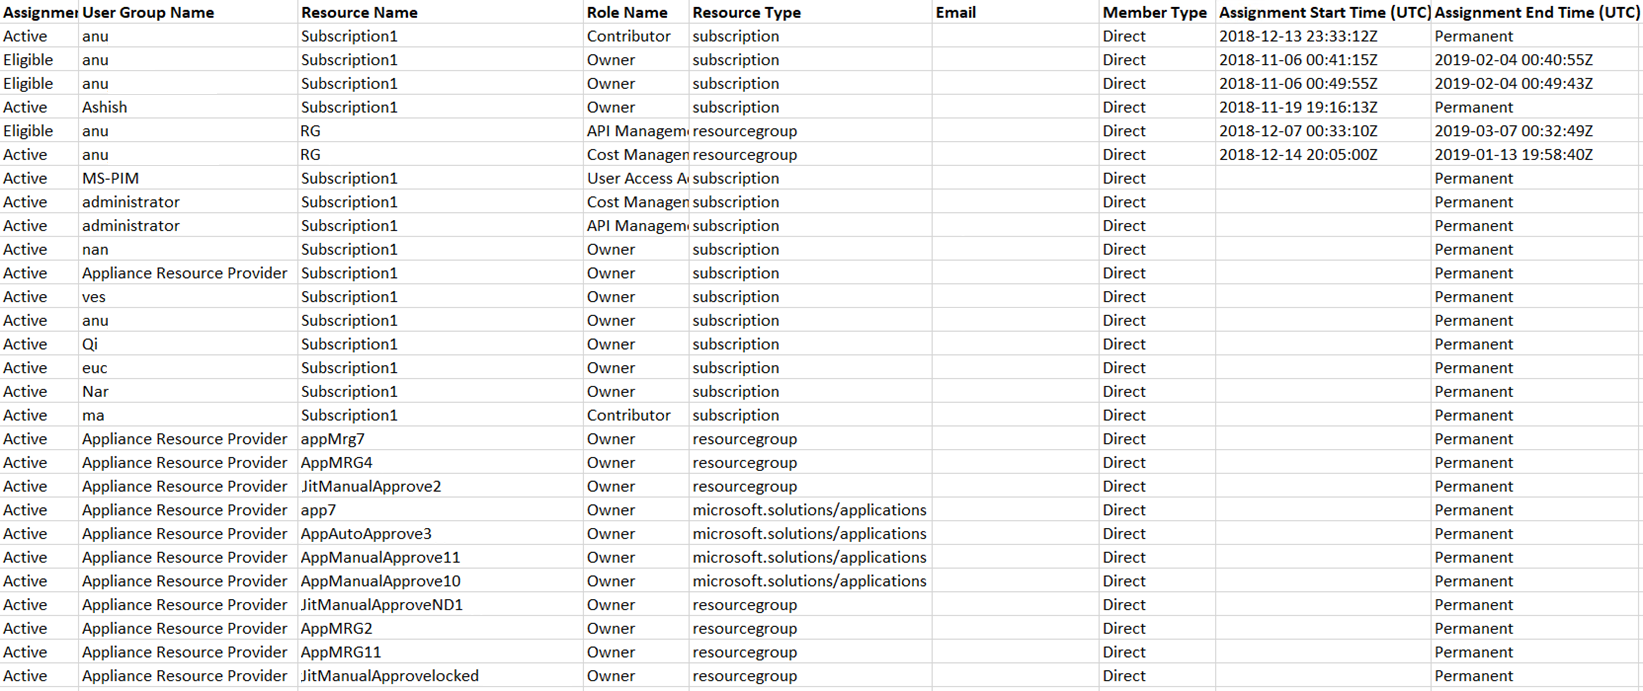 Exported role assignments in CSV file as display in Excel